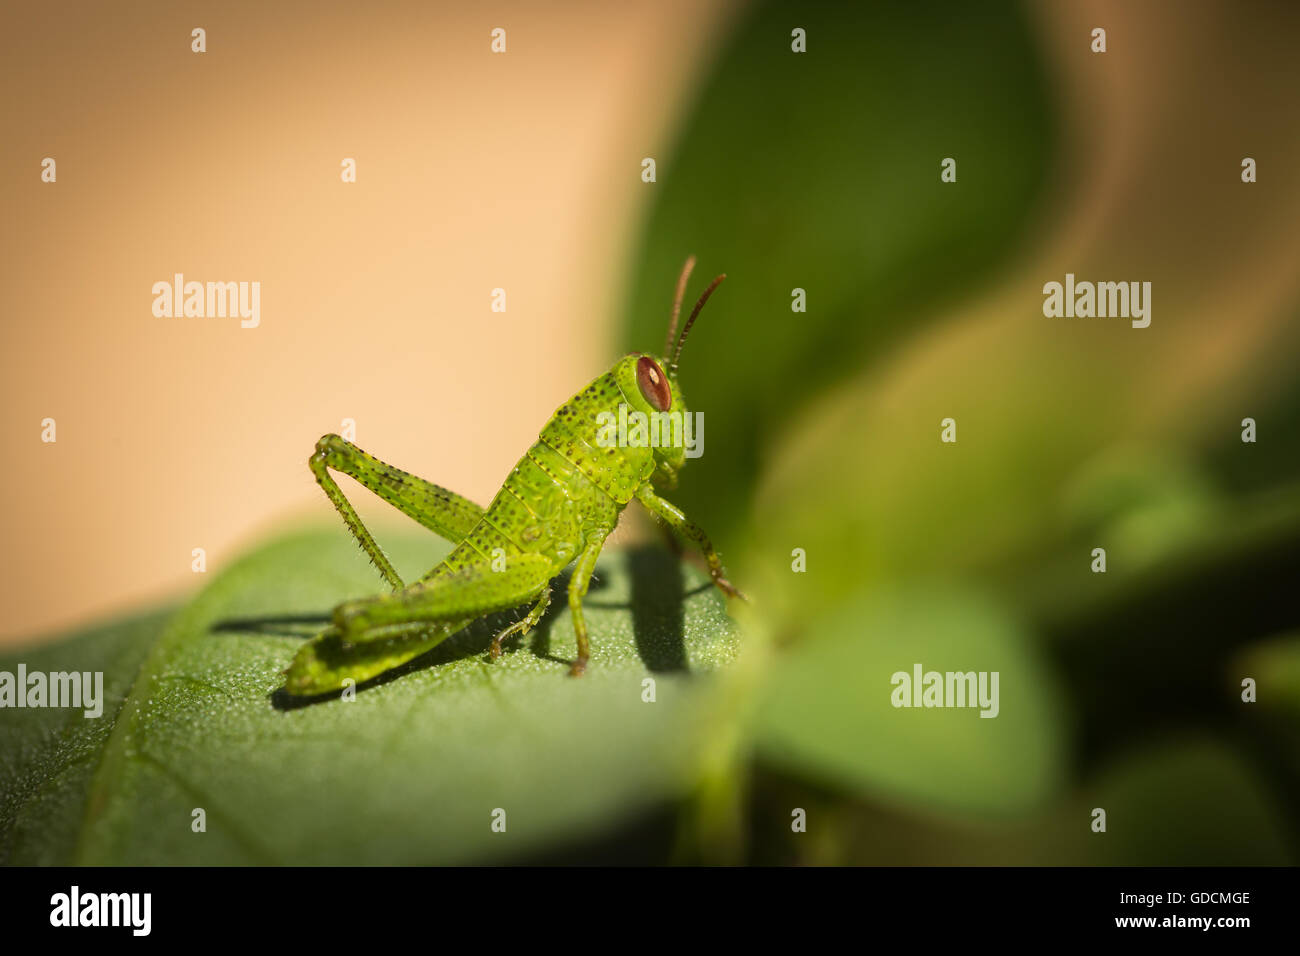 Side on macro photograph of a brightly coloured small green grasshopper with reddish brown eyes sitting on a green leaf Stock Photo